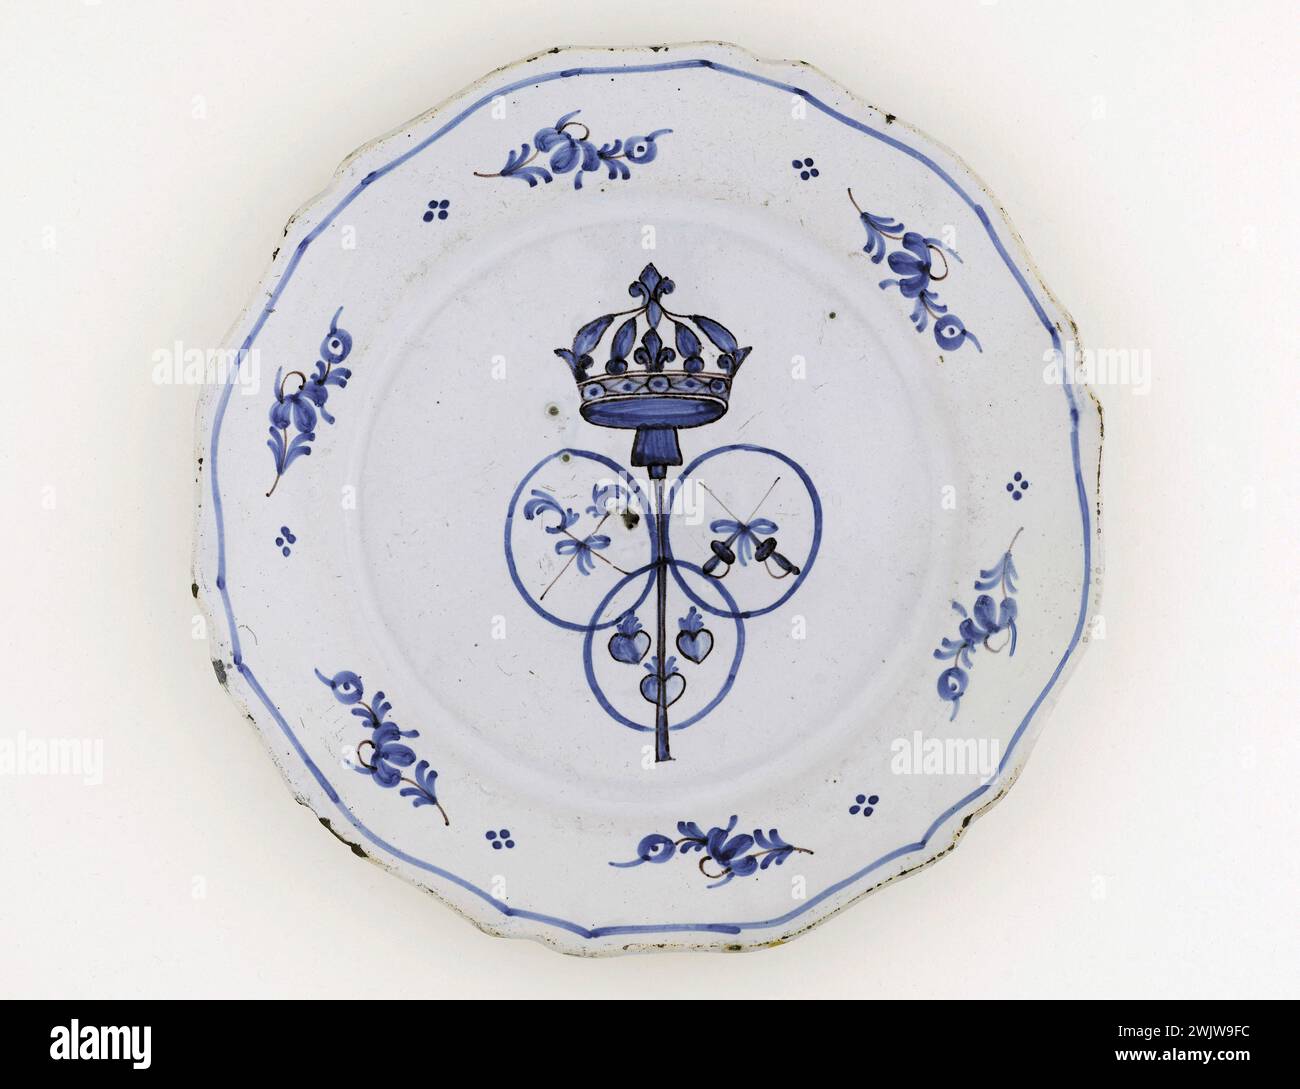 Anonymous. Plate. Earthenware. Around 1789. Paris, Carnavalet museum. 70955-25 Weapon, Heart, Crown, Epee, Faience, Decorative Pattern, Revolutionary Periode, Pic, Crockery, Plate Stock Photo